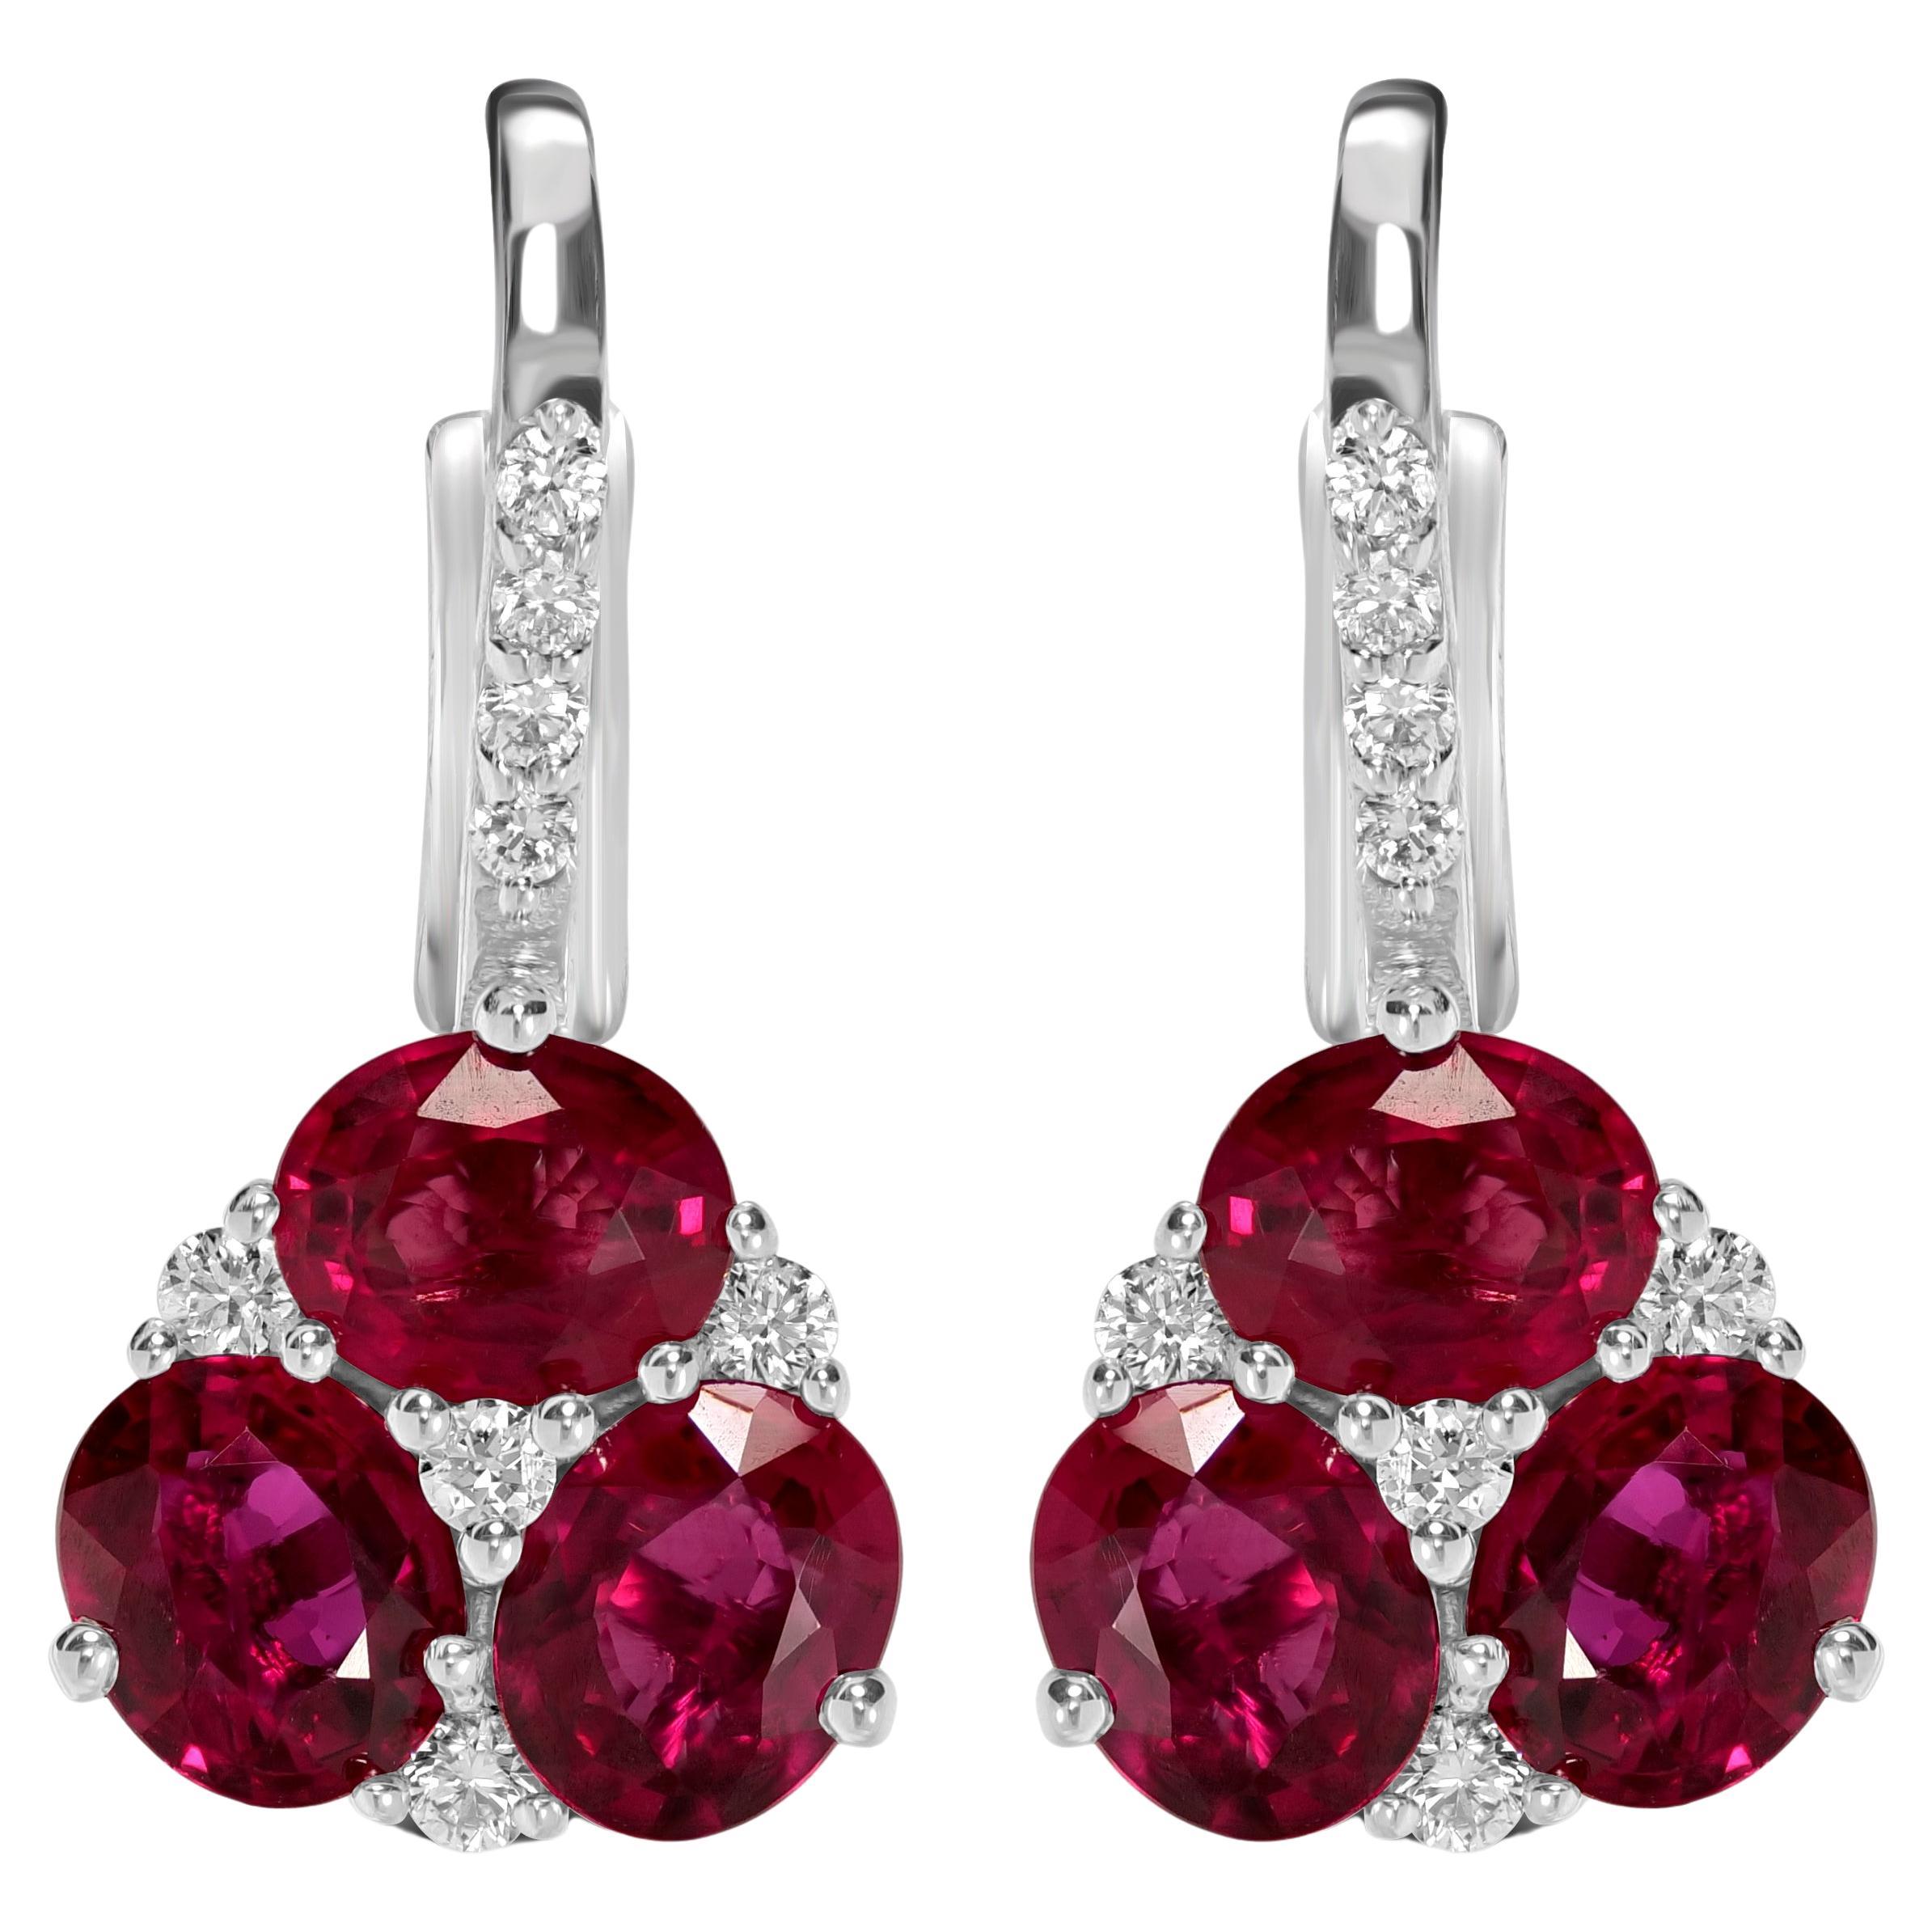 3.22 Carats Ruby and Diamond Drop Earrings in 18k White Gold